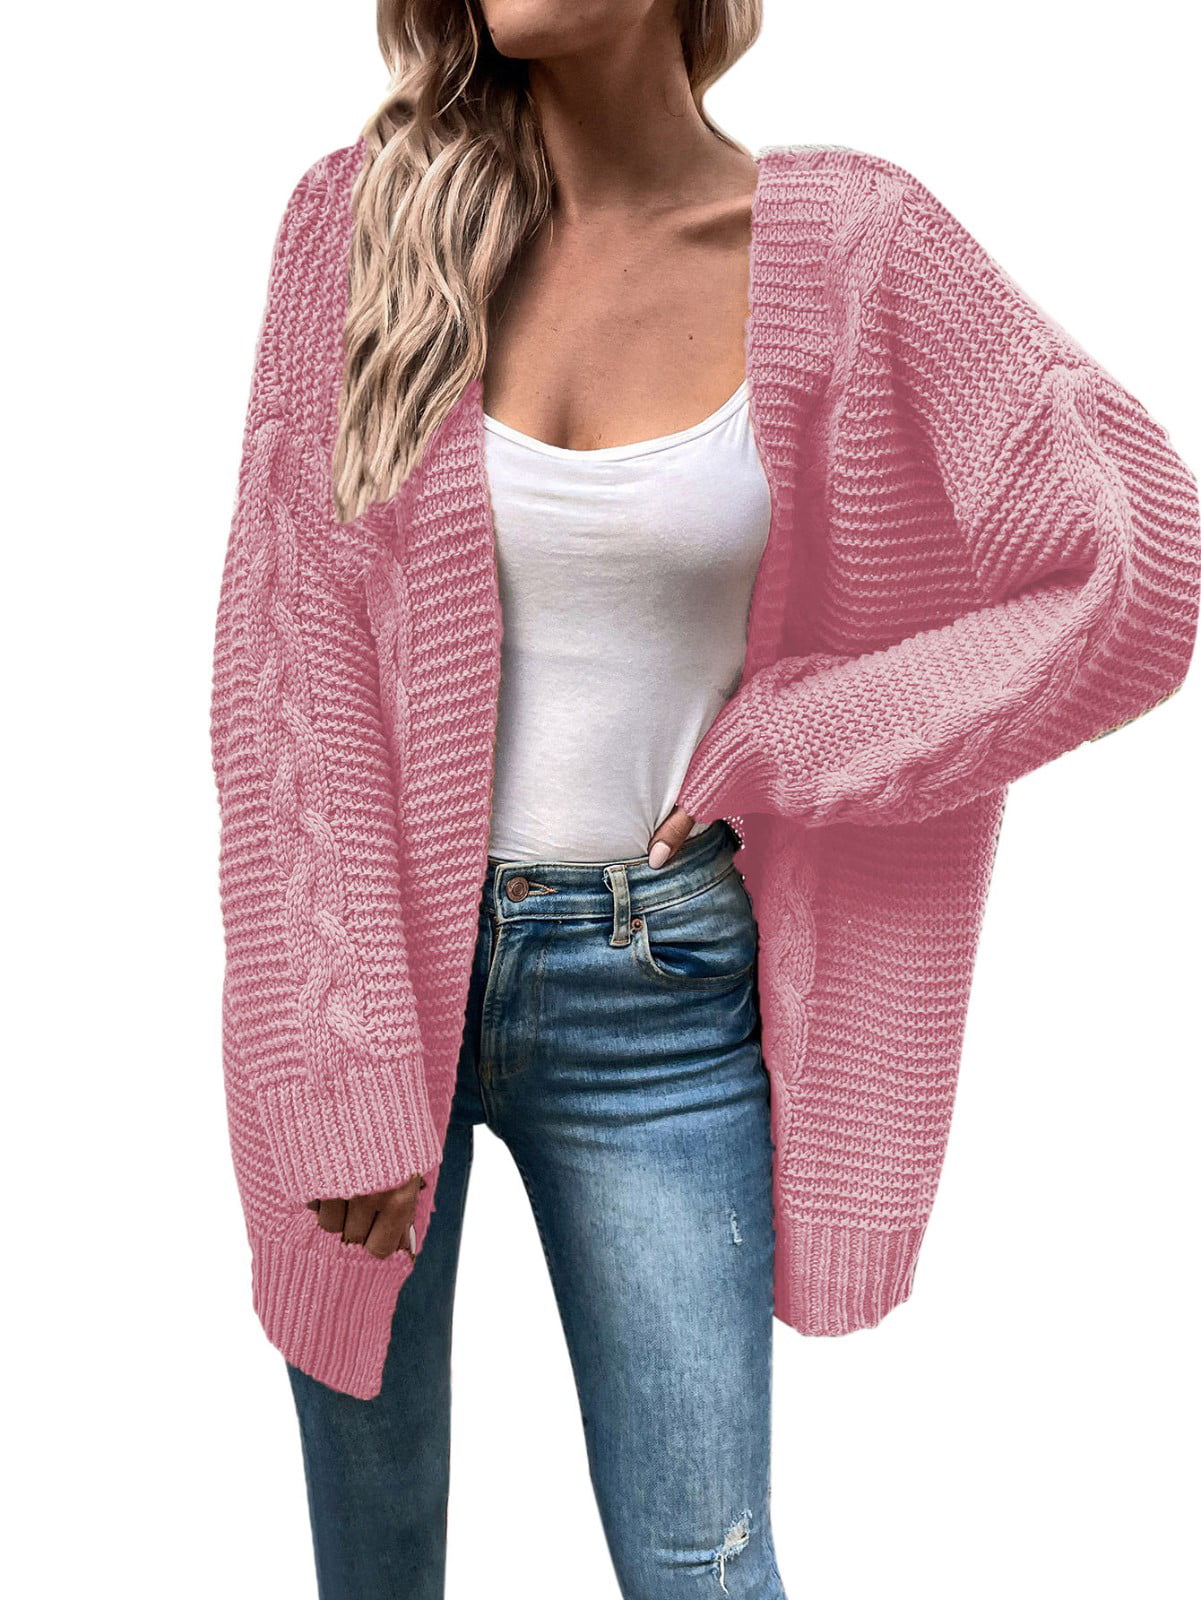 Ketyyh-chn99 Cardigan Sweater Front Soft Outwear Cardigan Button Knit Women Cable for Pink,M Open